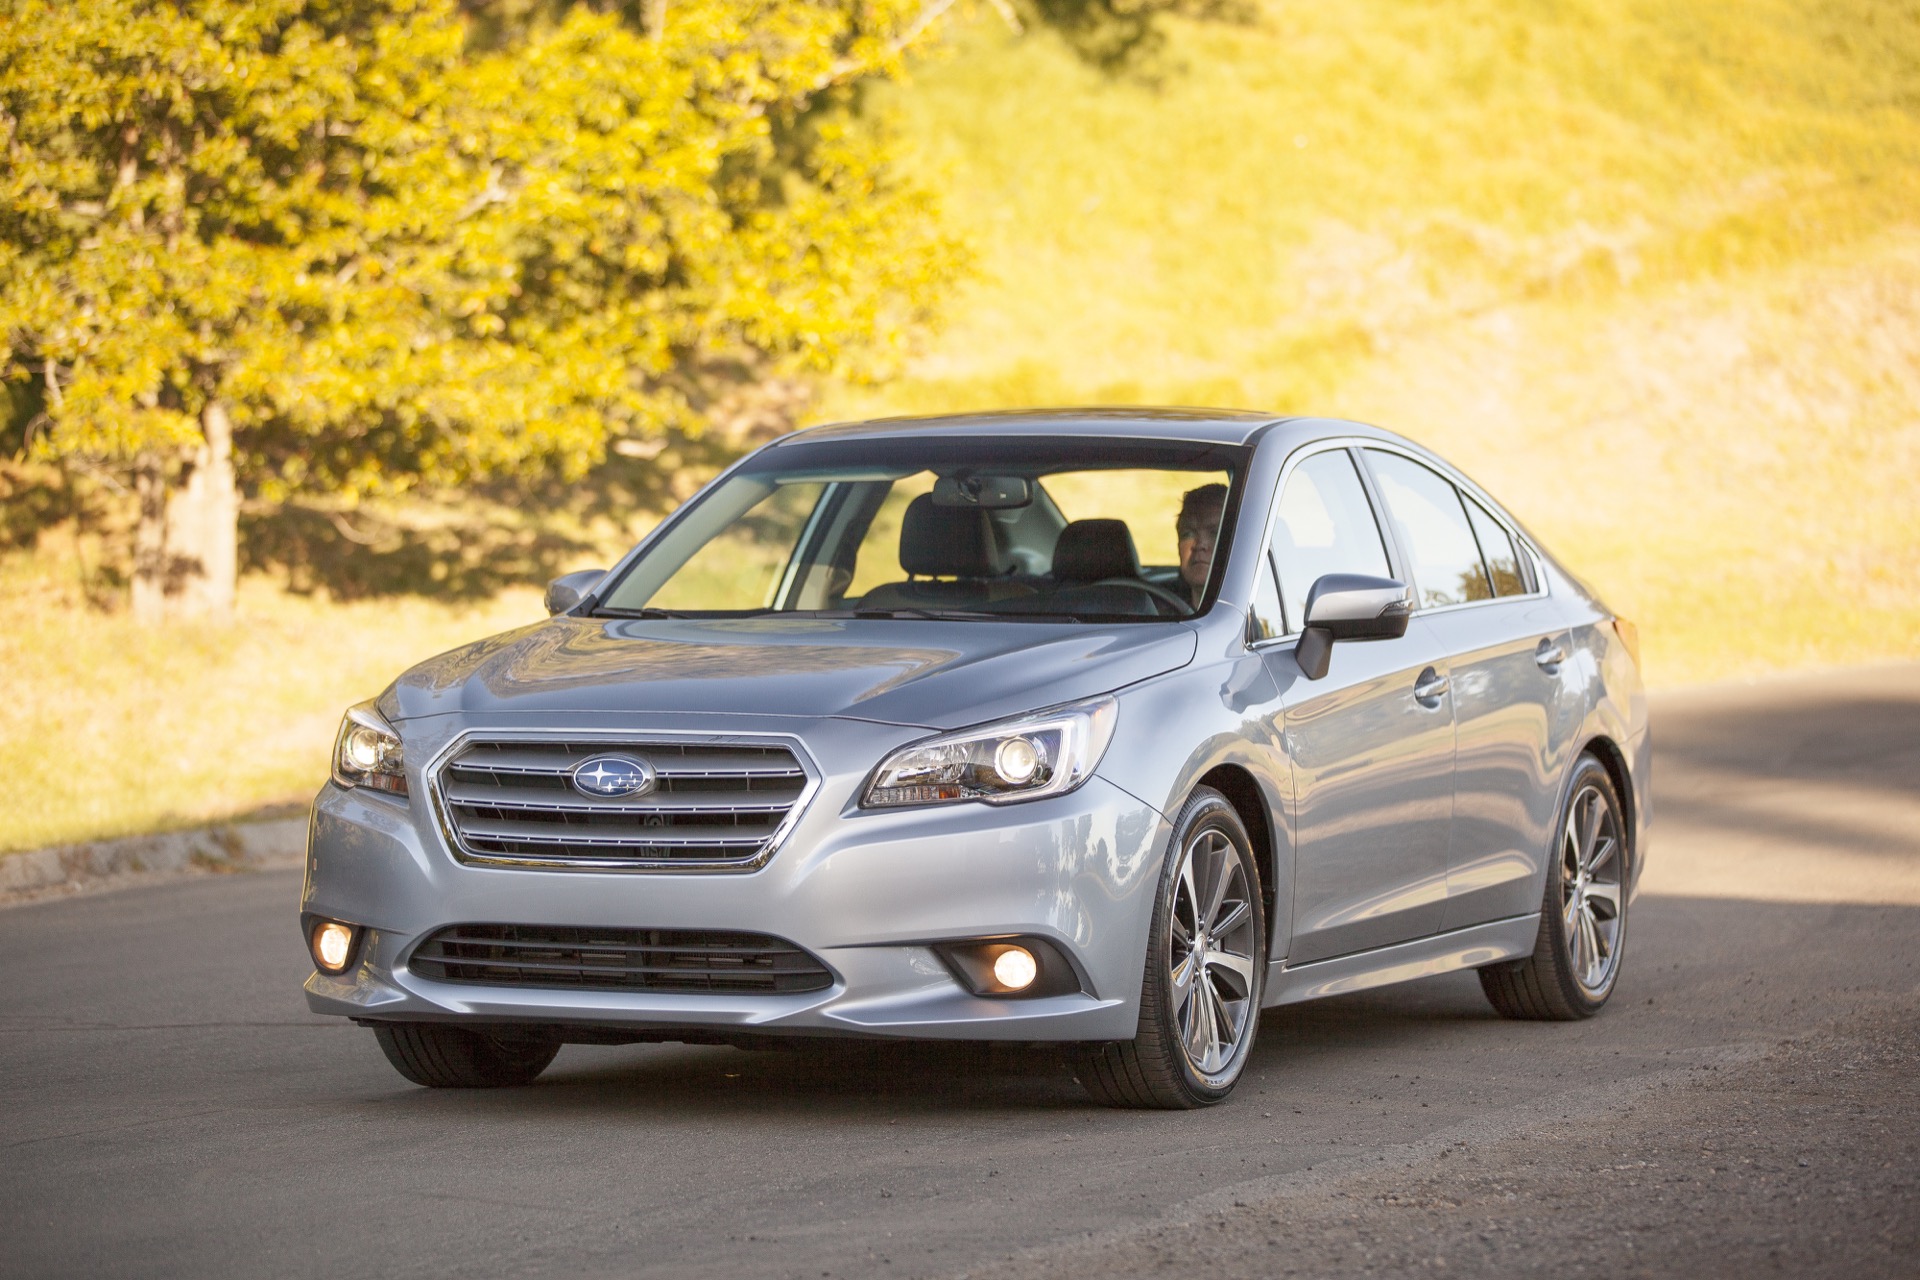 2016 Subaru Legacy Review, Ratings, Specs, Prices, and Photos - The Car